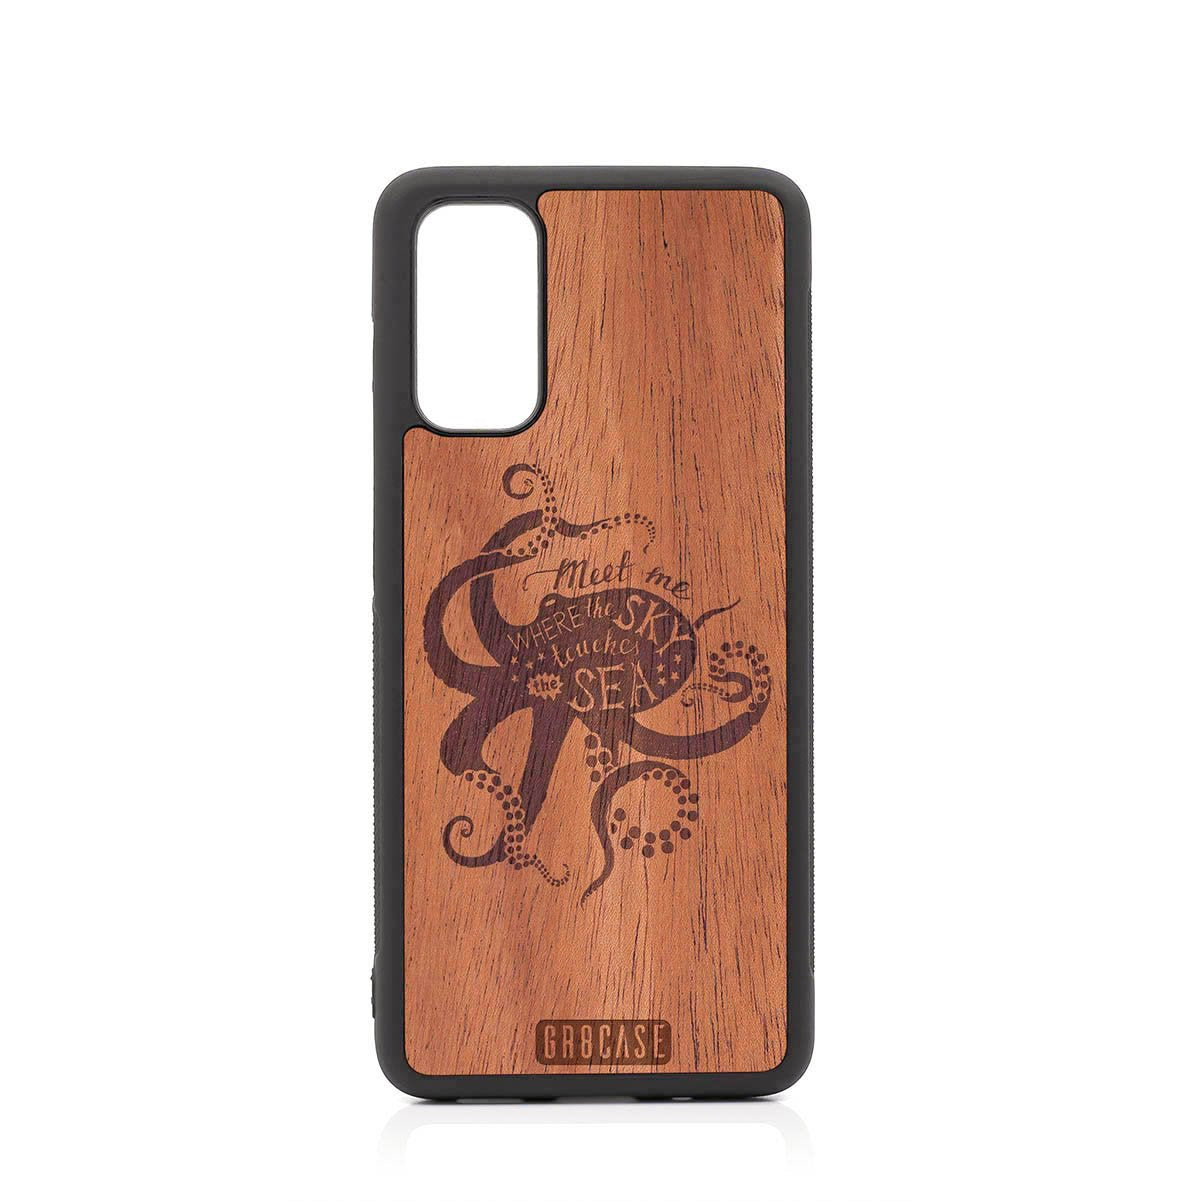 Meet Me Where The Sky Touches The Sea (Octopus) Design Wood Case For Samsung Galaxy S20 FE 5G